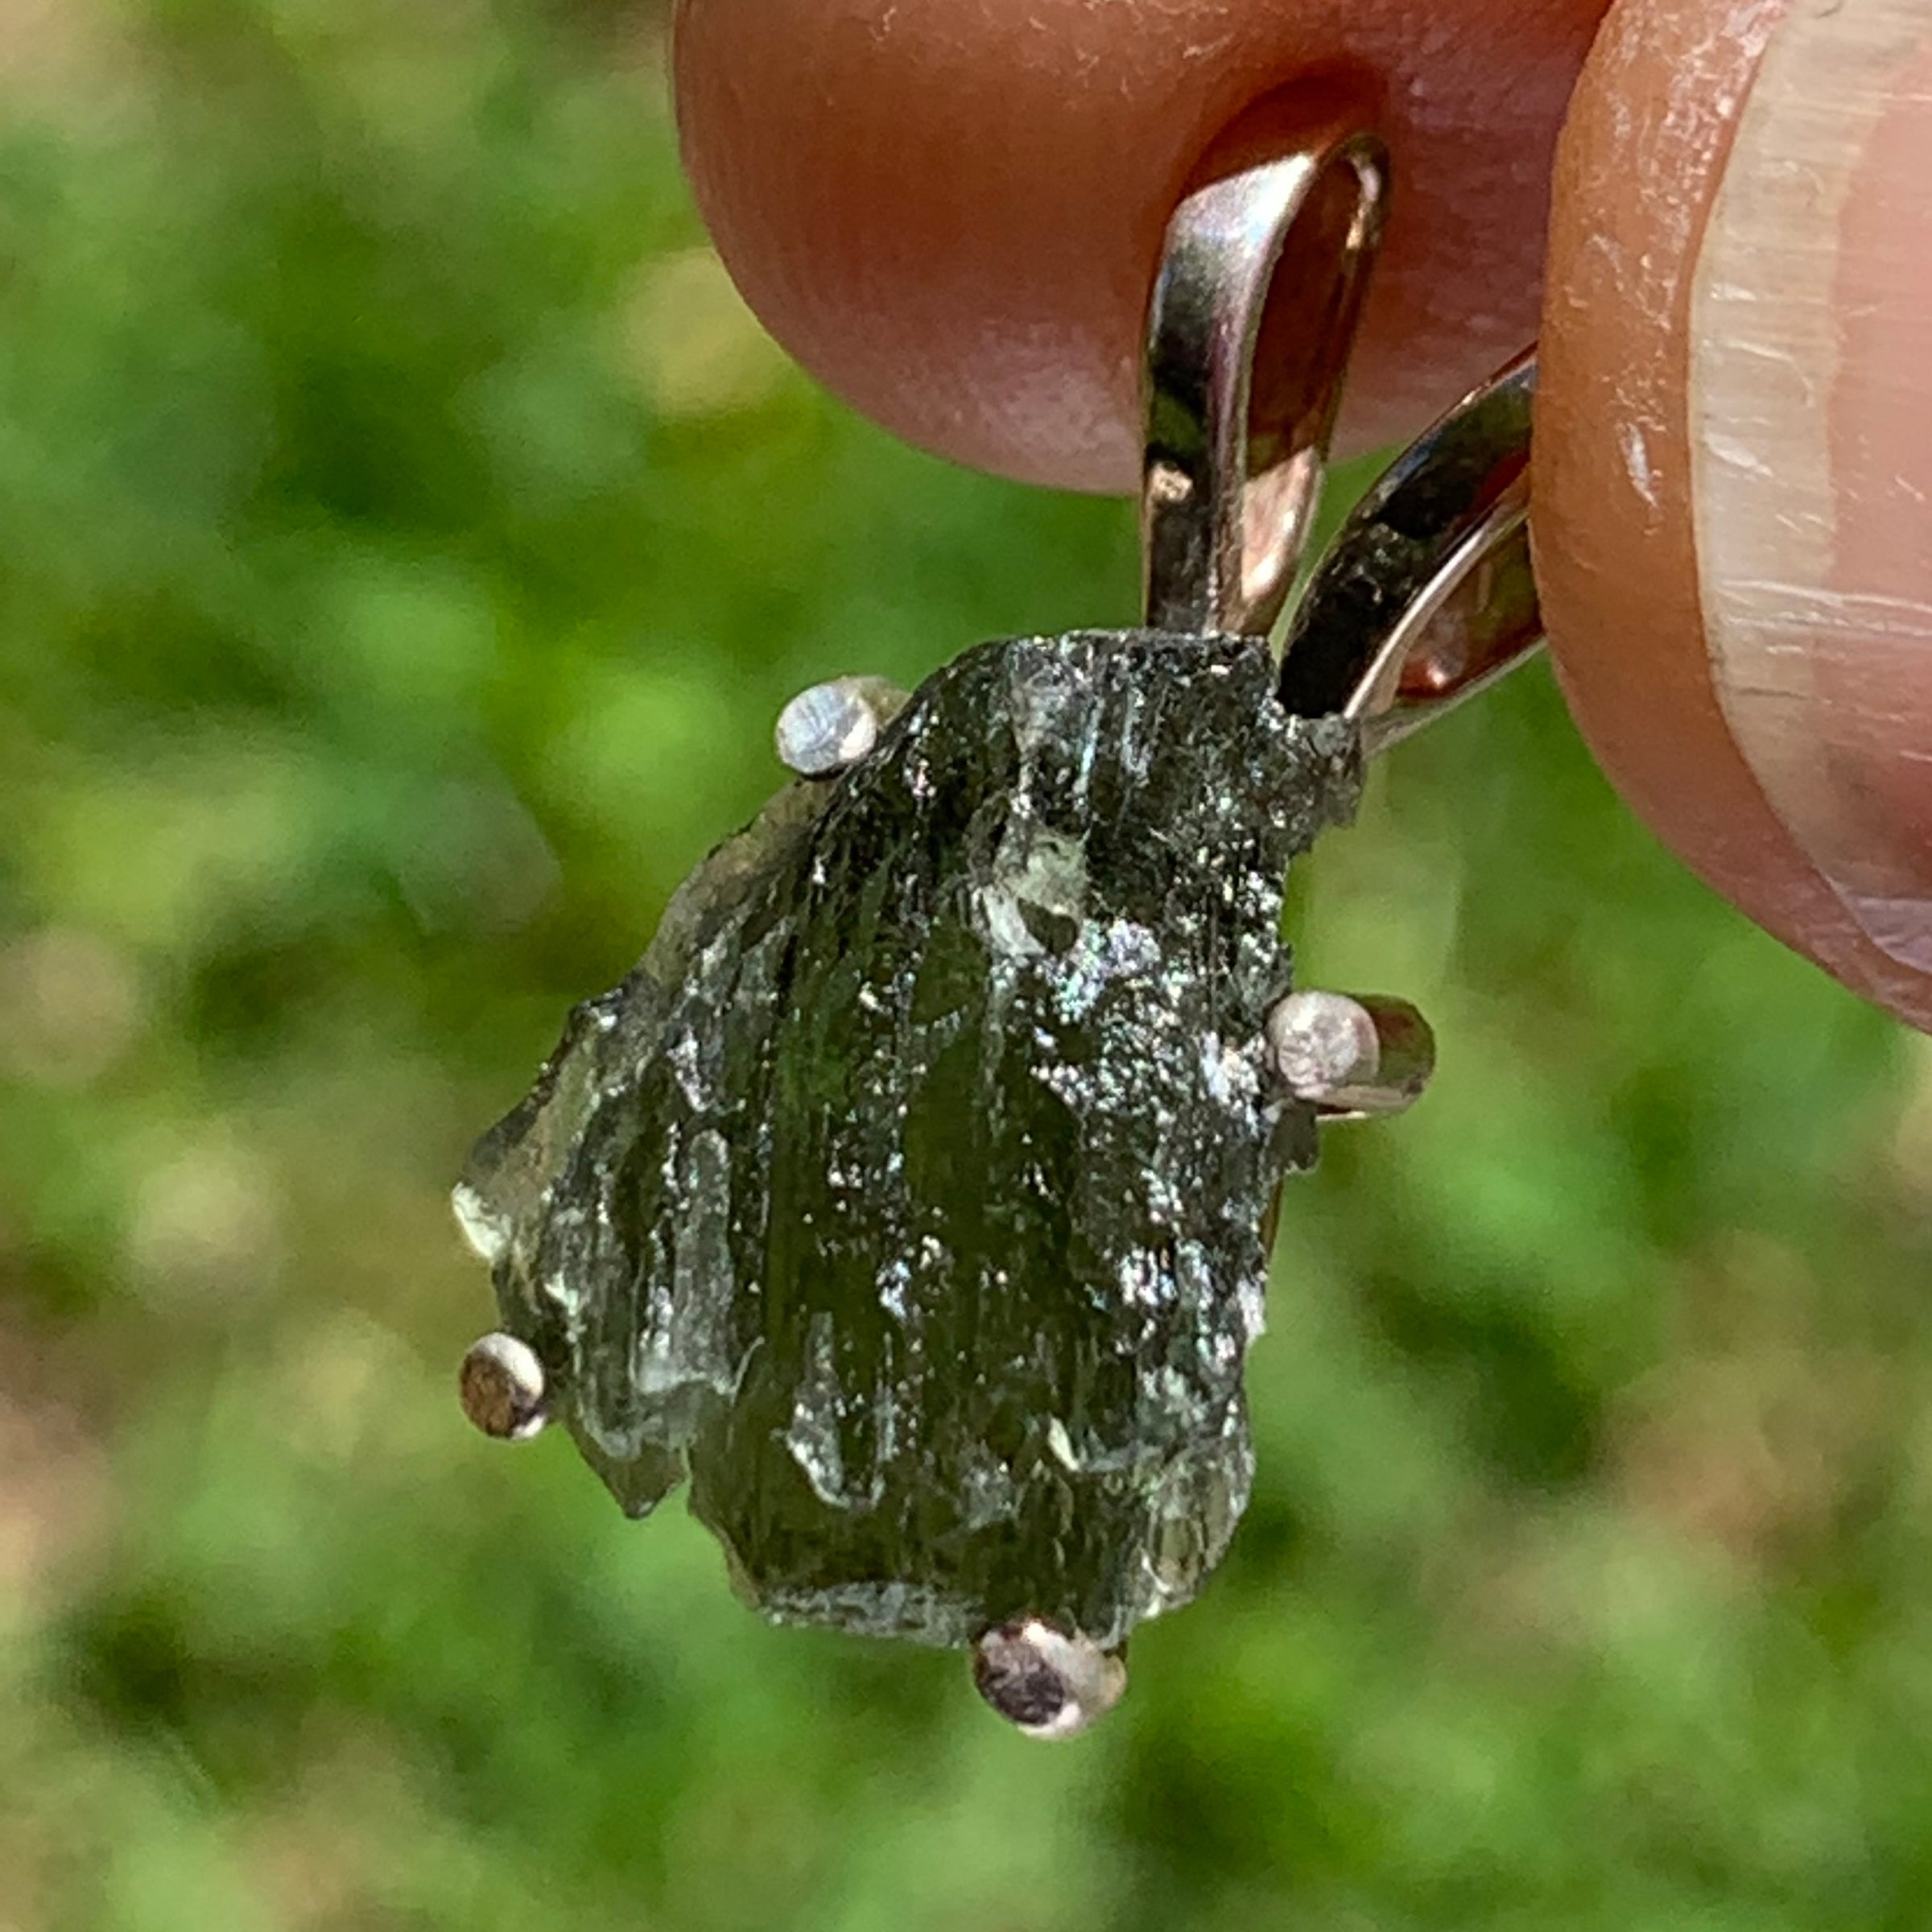 raw moldavite tektite in 4 prong sterling silver basket pendant held in hand with sunlight shining on it